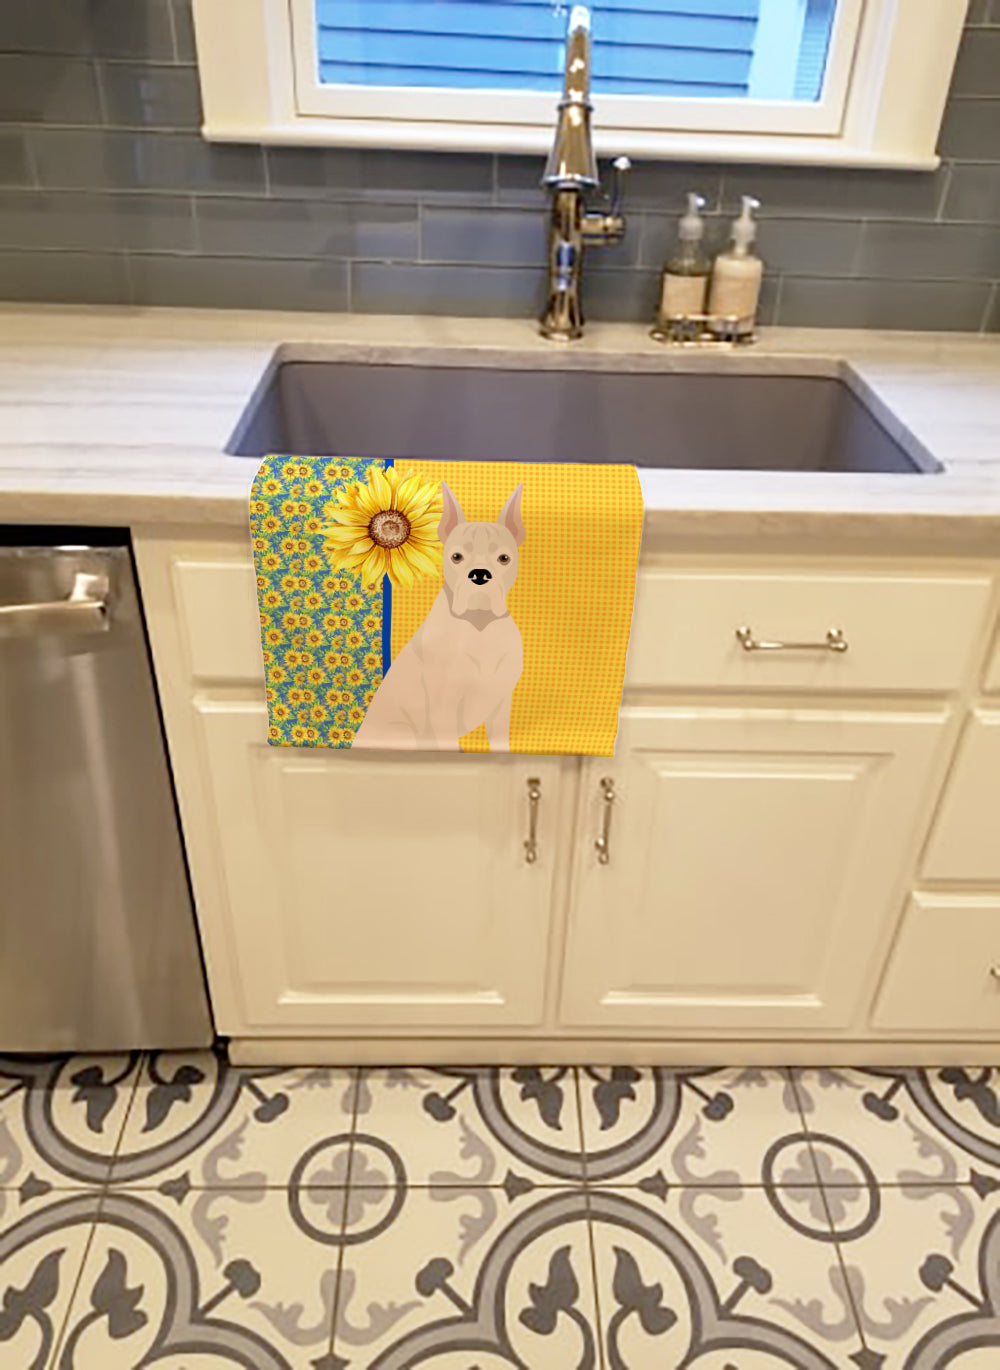 Buy this Summer Sunflowers White Boxer Kitchen Towel